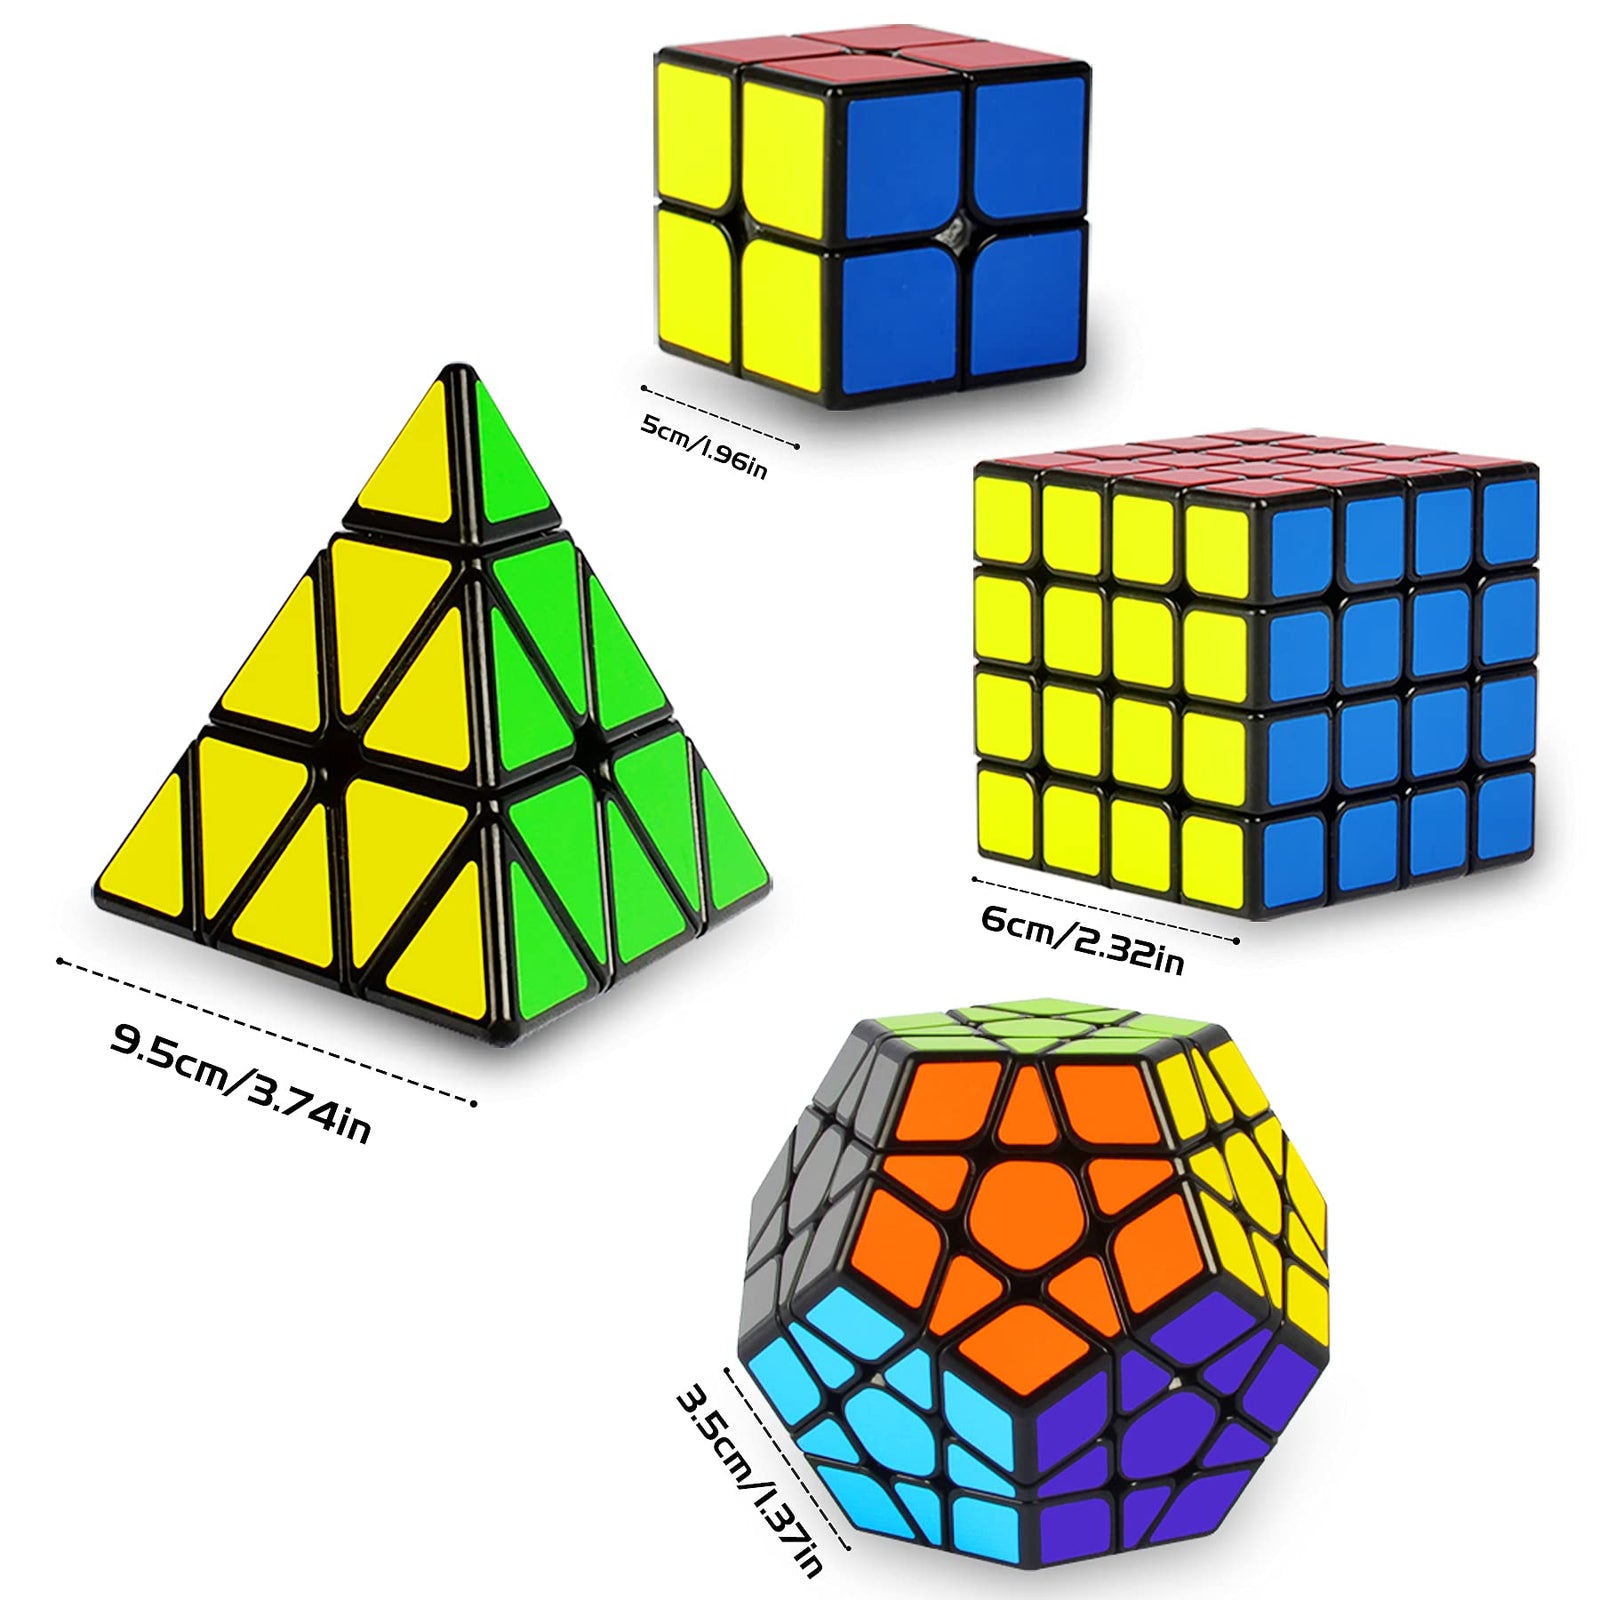 Speed Cube Set, Puzzle Cube, Magic Cube 2x2 4x4 Pyraminx Pyramid Megaminx Puzzle Cube Toy Gift for Children Adults, Pack of 4